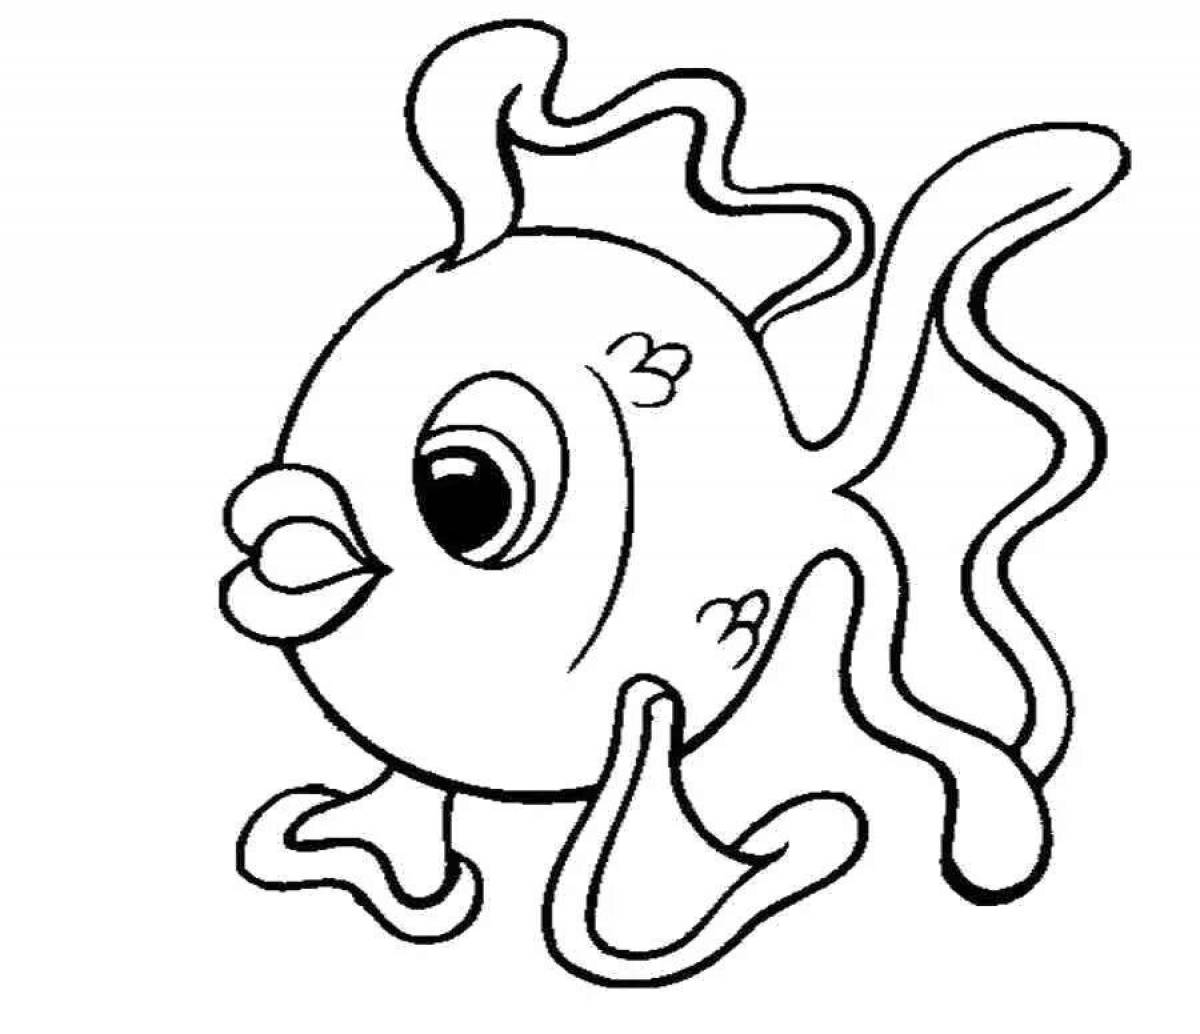 Playful goldfish coloring page for kids